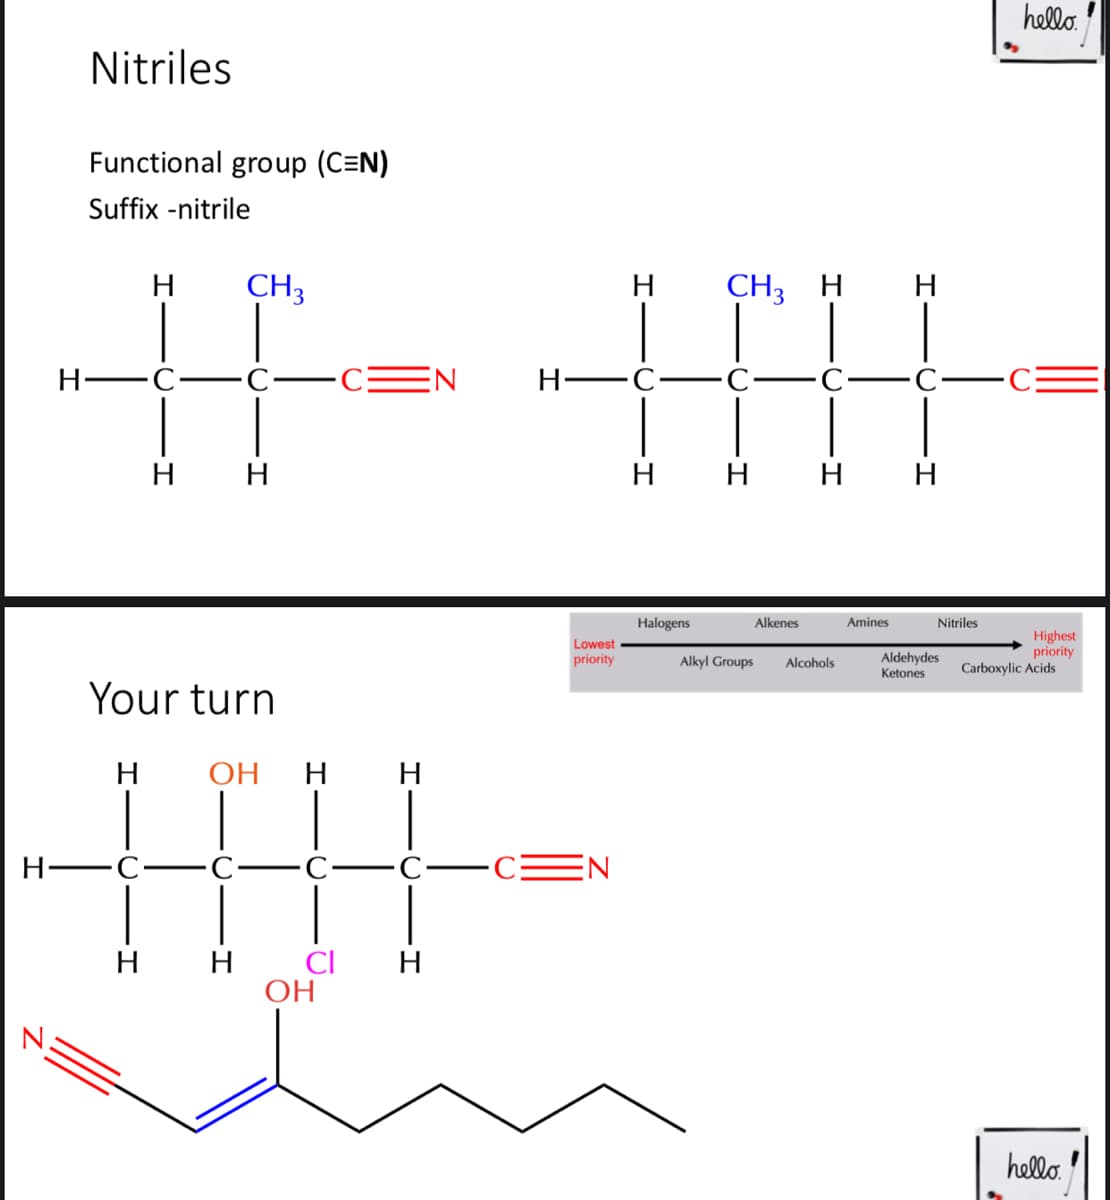 hello.
Nitriles
Functional group (C=N)
Suffix -nitrile
H
CH3
H
CH3 H H
H FC
-C-
EN
H-
C-
C
C-
H H
н н н н
Halogens
Alkenes
Amines
Nitriles
Highest
priority
Carboxylic Acids
Lowest
priority
Alkyl Groups
Aldehydes
Ketones
Alcohols
Your turn
H
ОН
H
H
Н—с-
C-
C-CEN
н н
CI
H
ОН
hello.
